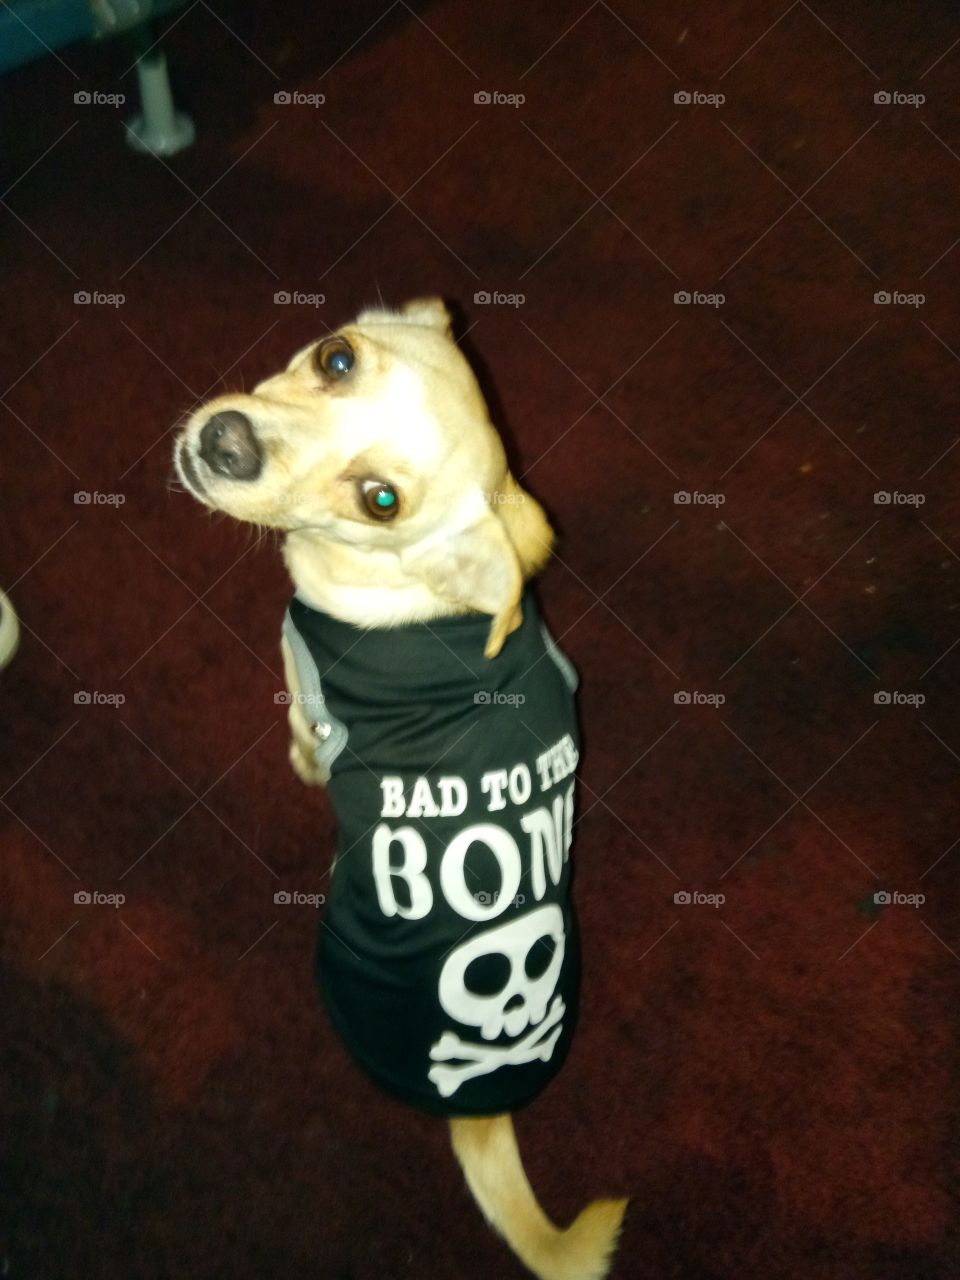 My baby girl is bad to the bone.